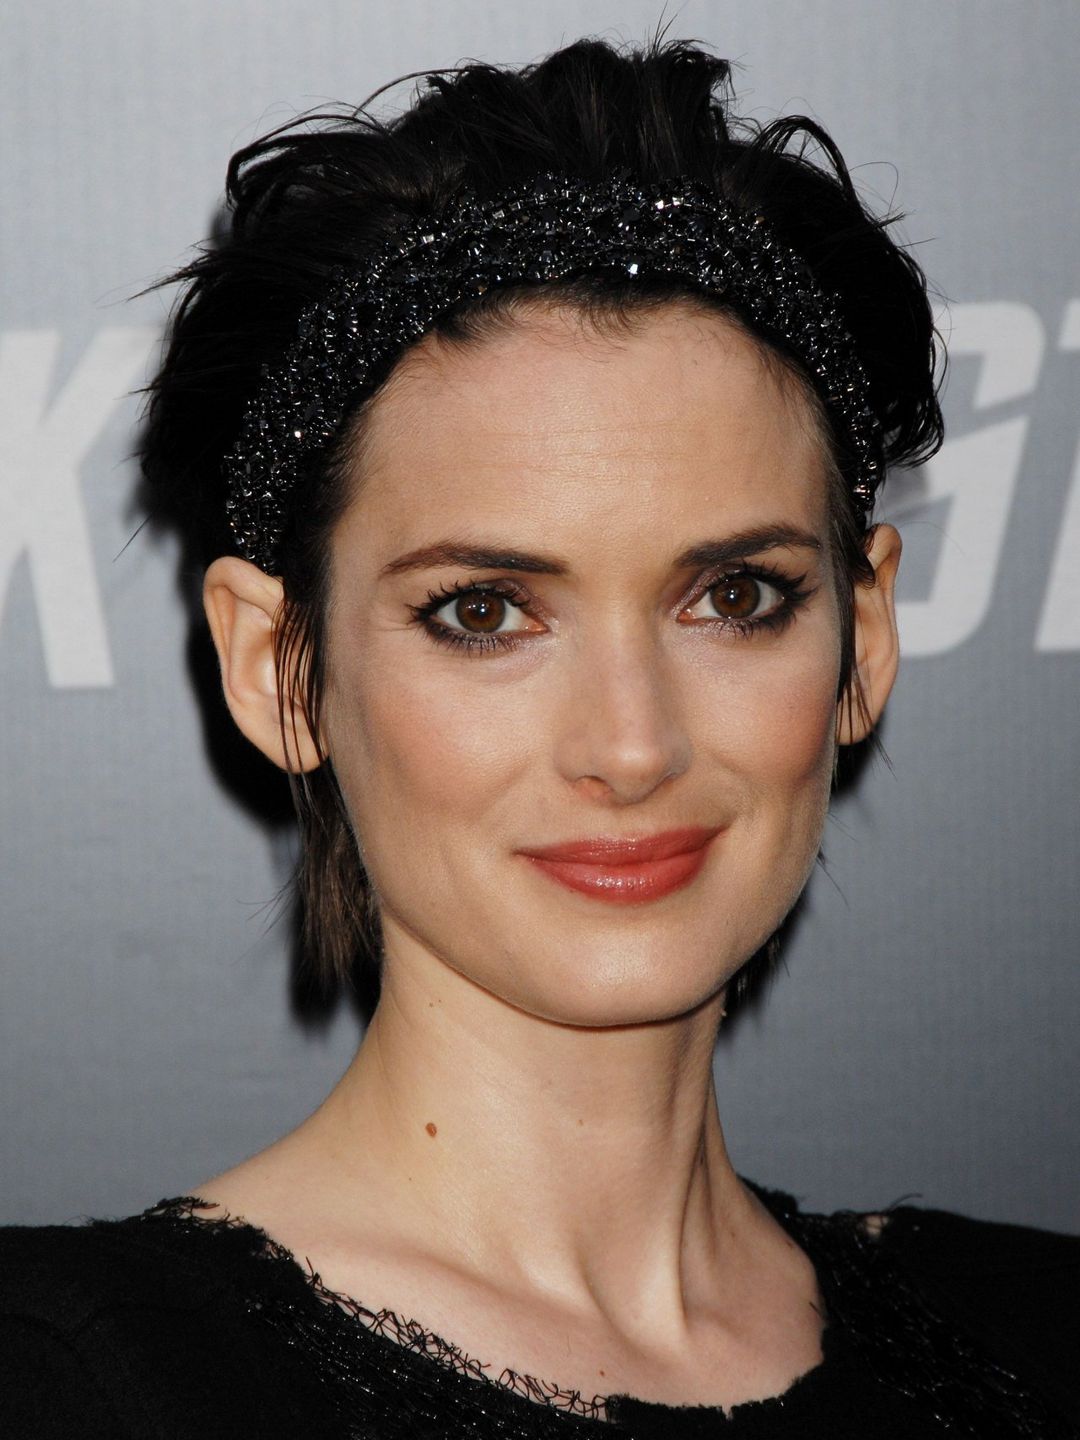 Winona Ryder who is she